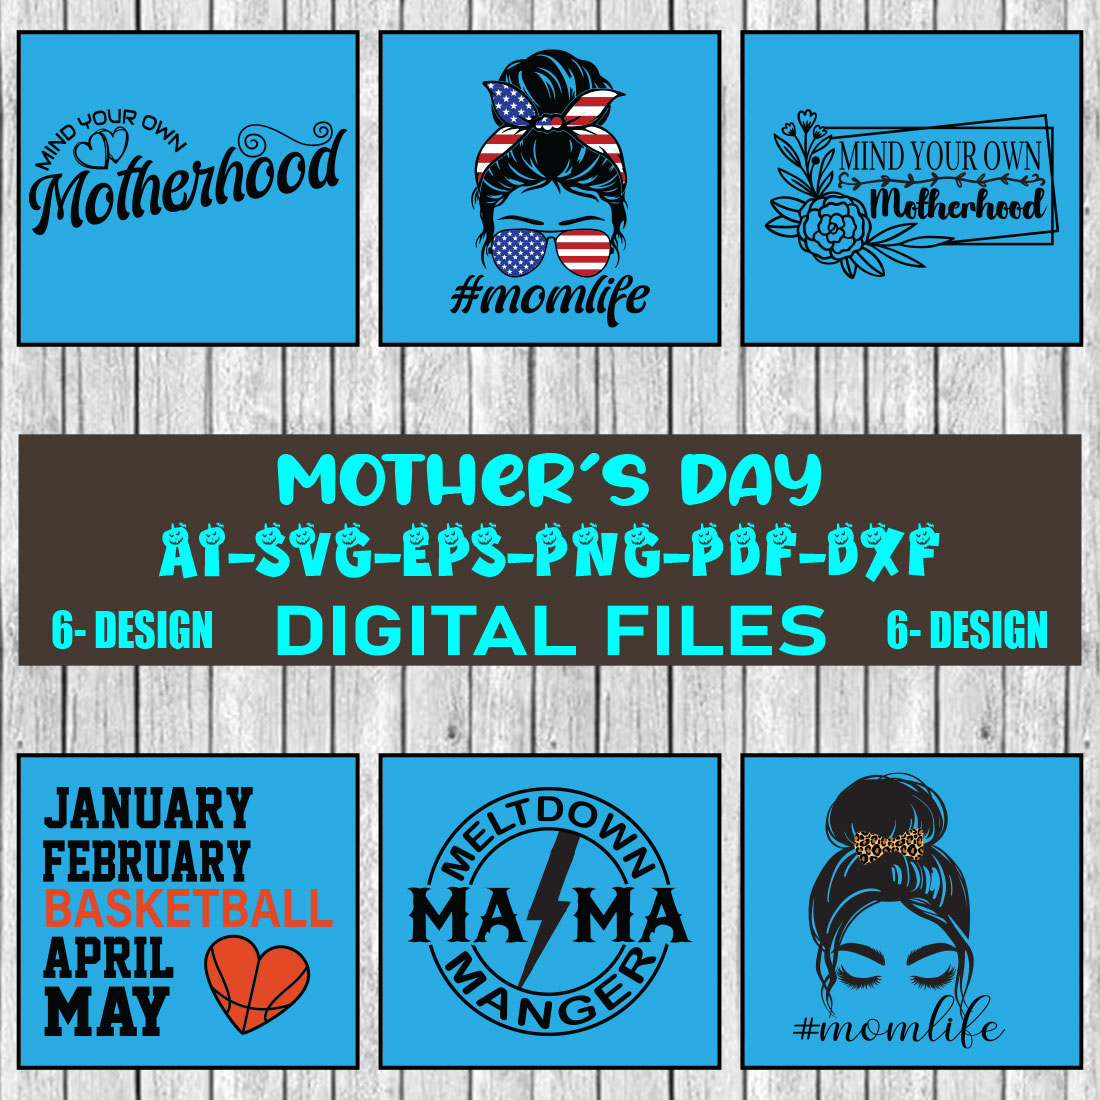 Mother's Day SVG Files Vol-01 cover image.